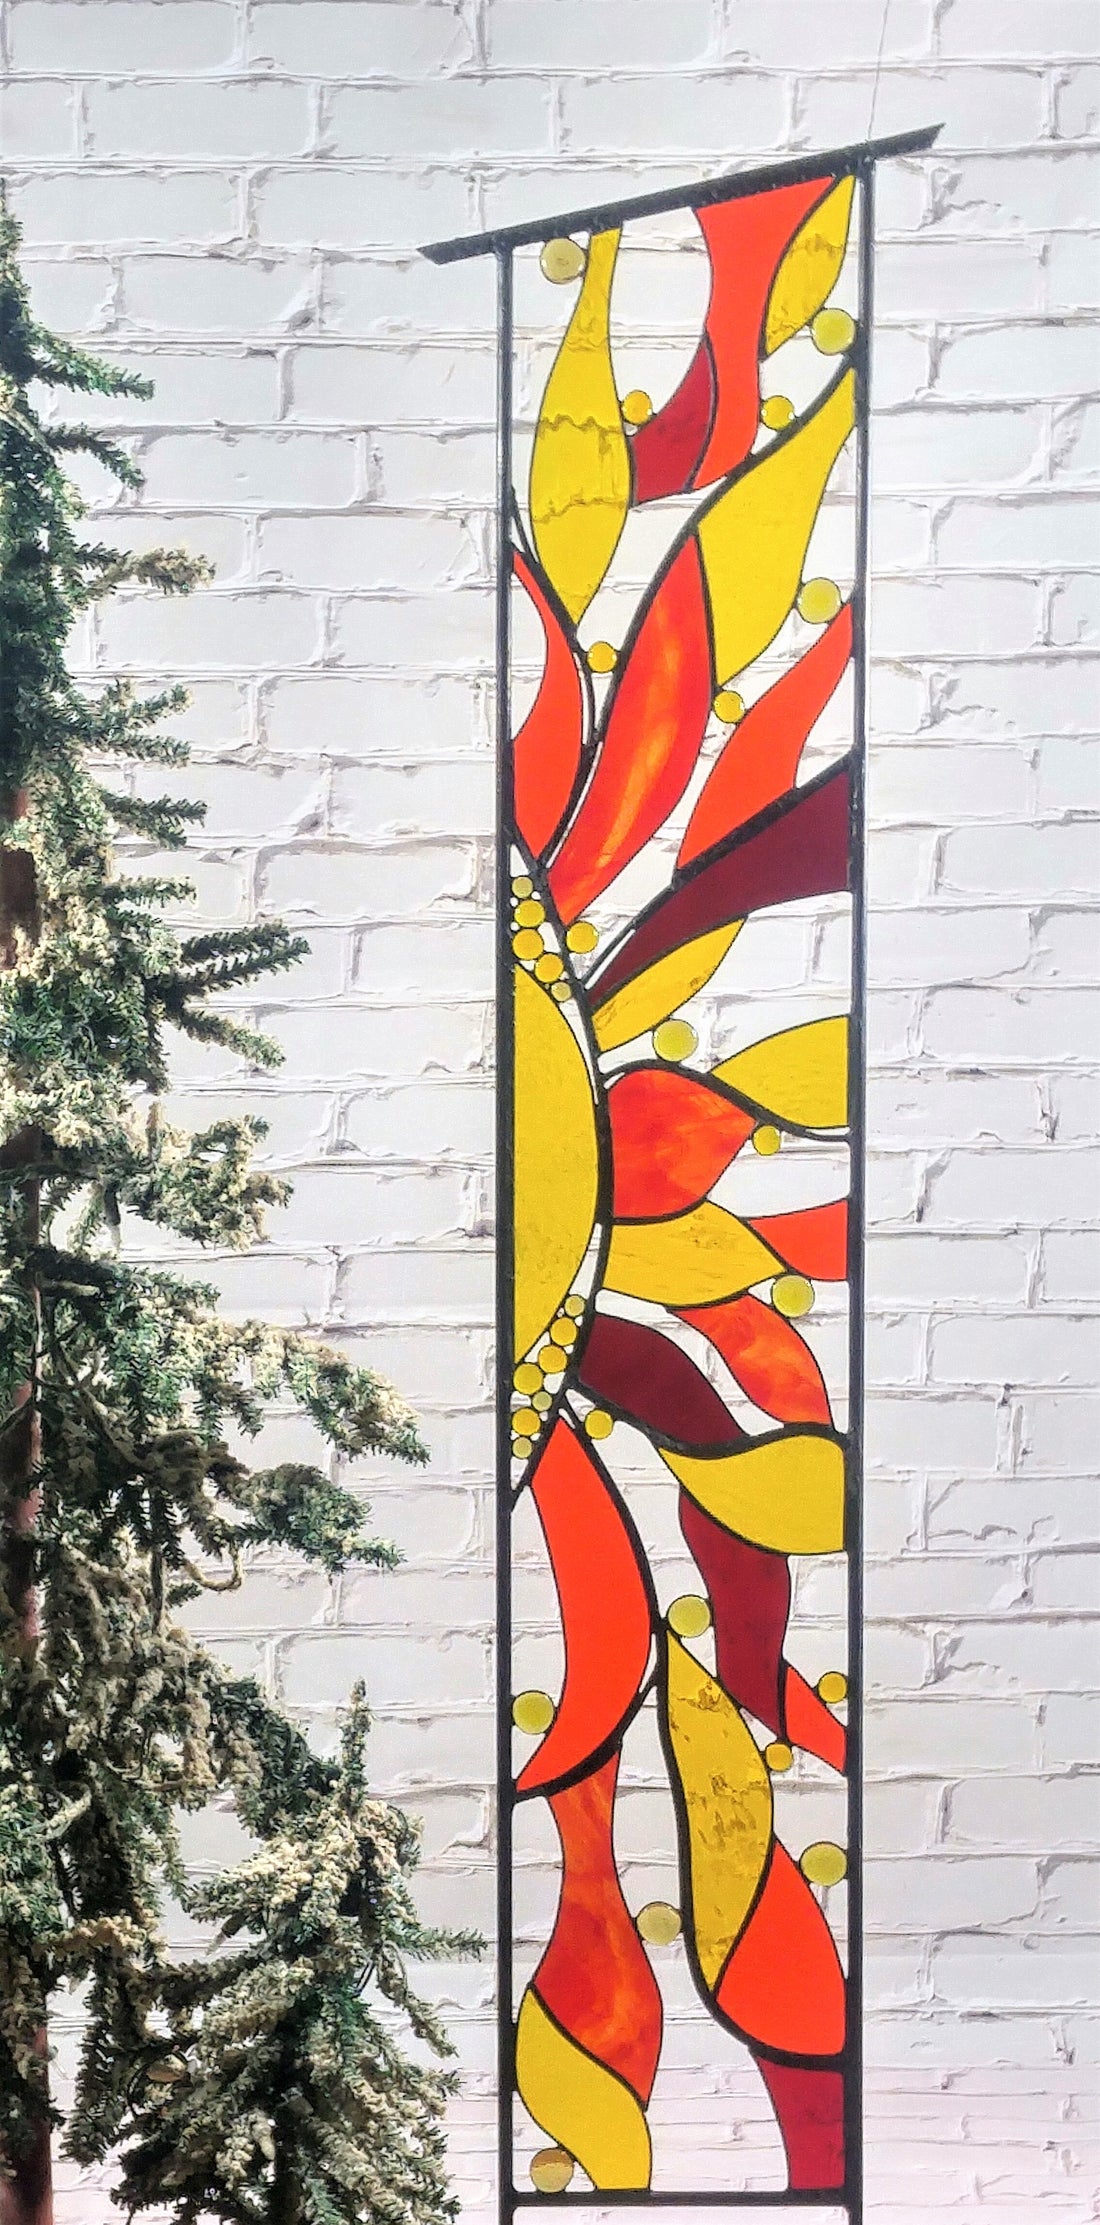 large stained glass garden sculpture